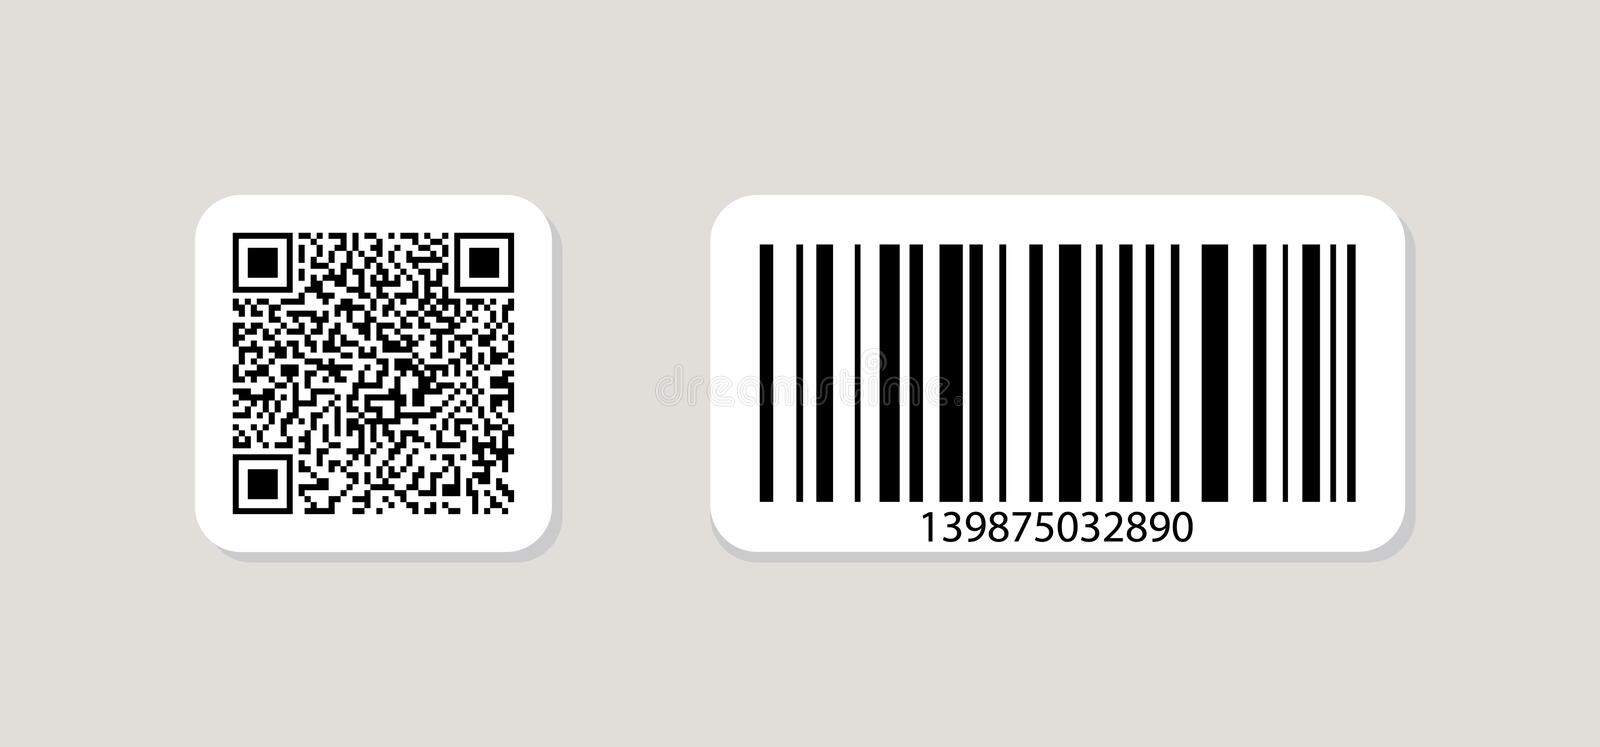 What Is the Difference Between Barcode And QR Code?